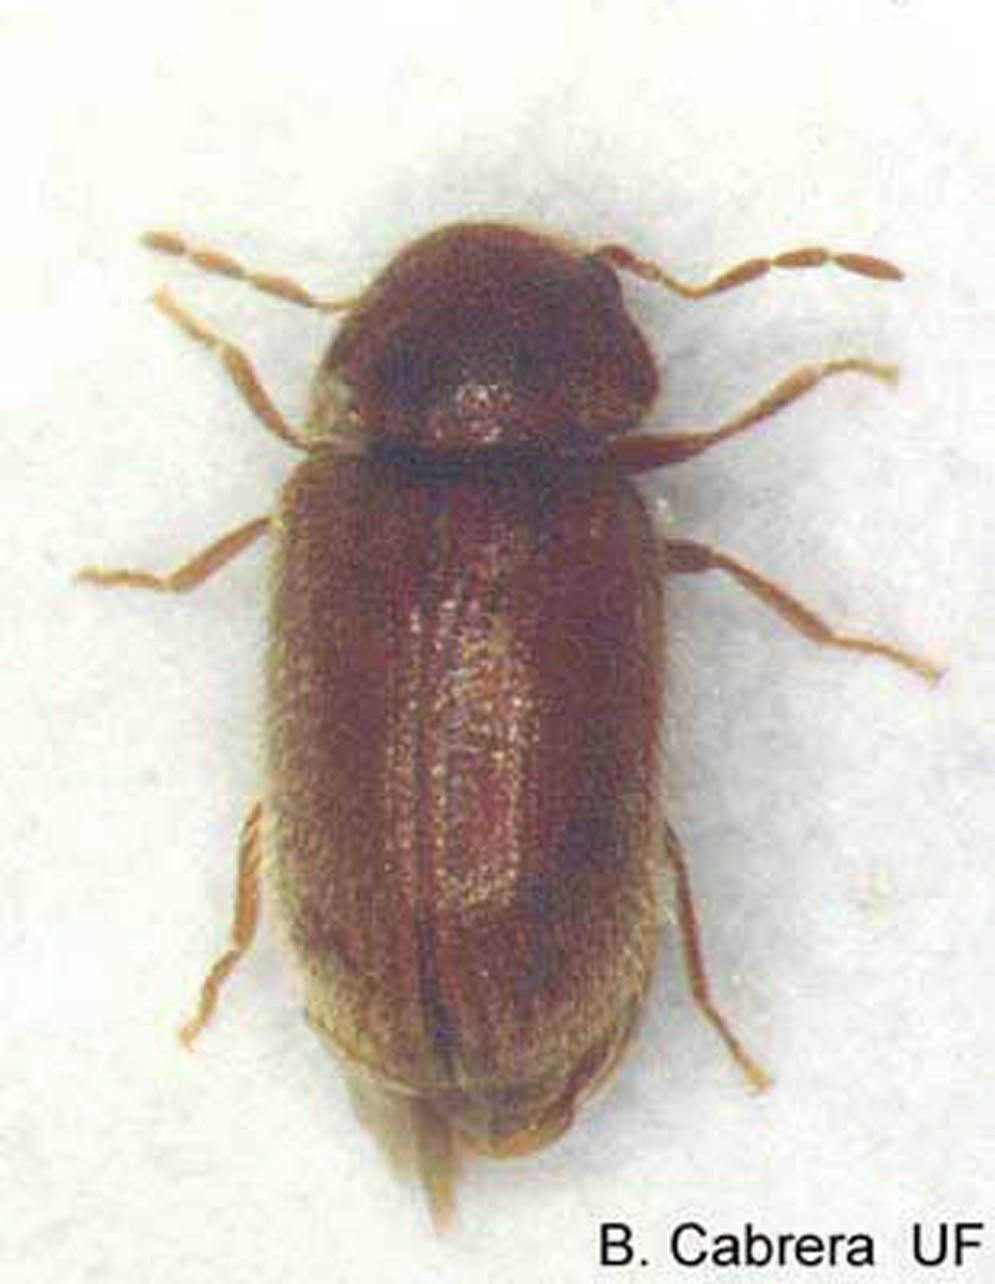 EENY-228 Drugstore Beetle, Stegobium paniceum (L.) (Insecta: Coleoptera: Anobiidae) 1 Brian J. Cabrera 2 Introduction There are over 1000 described species of anobiids.